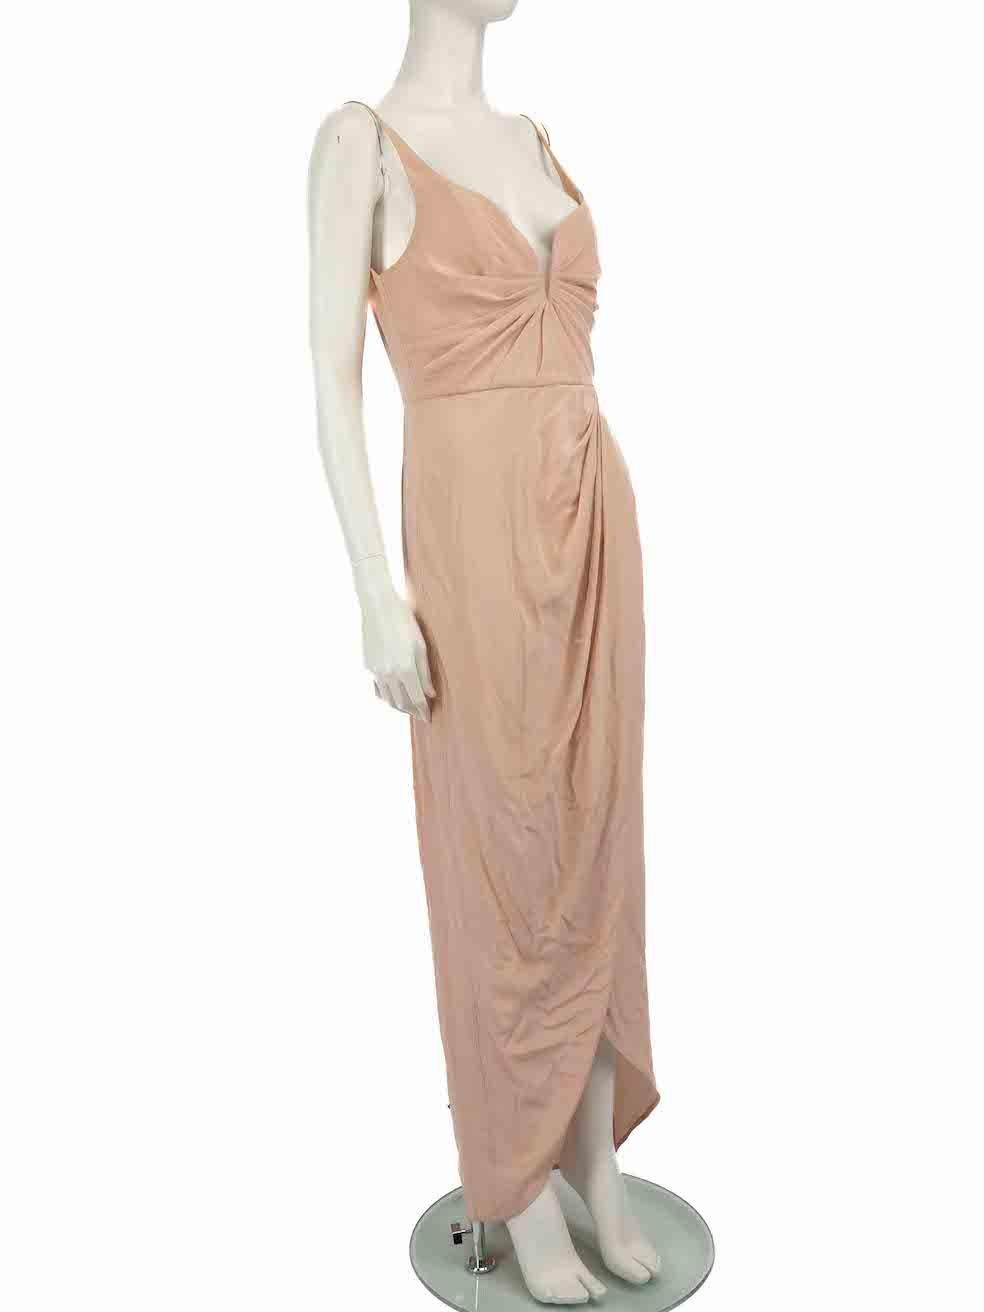 CONDITION is Good. Minor wear to dress is evident. Light wear to underarms and straps. There are small marks to the bust and back on this used Zimmerman designer resale item.
 
 
 
 Details
 
 
 Pink
 
 Silk
 
 Slip dress
 
 Plunge neck
 
 Midi
 
